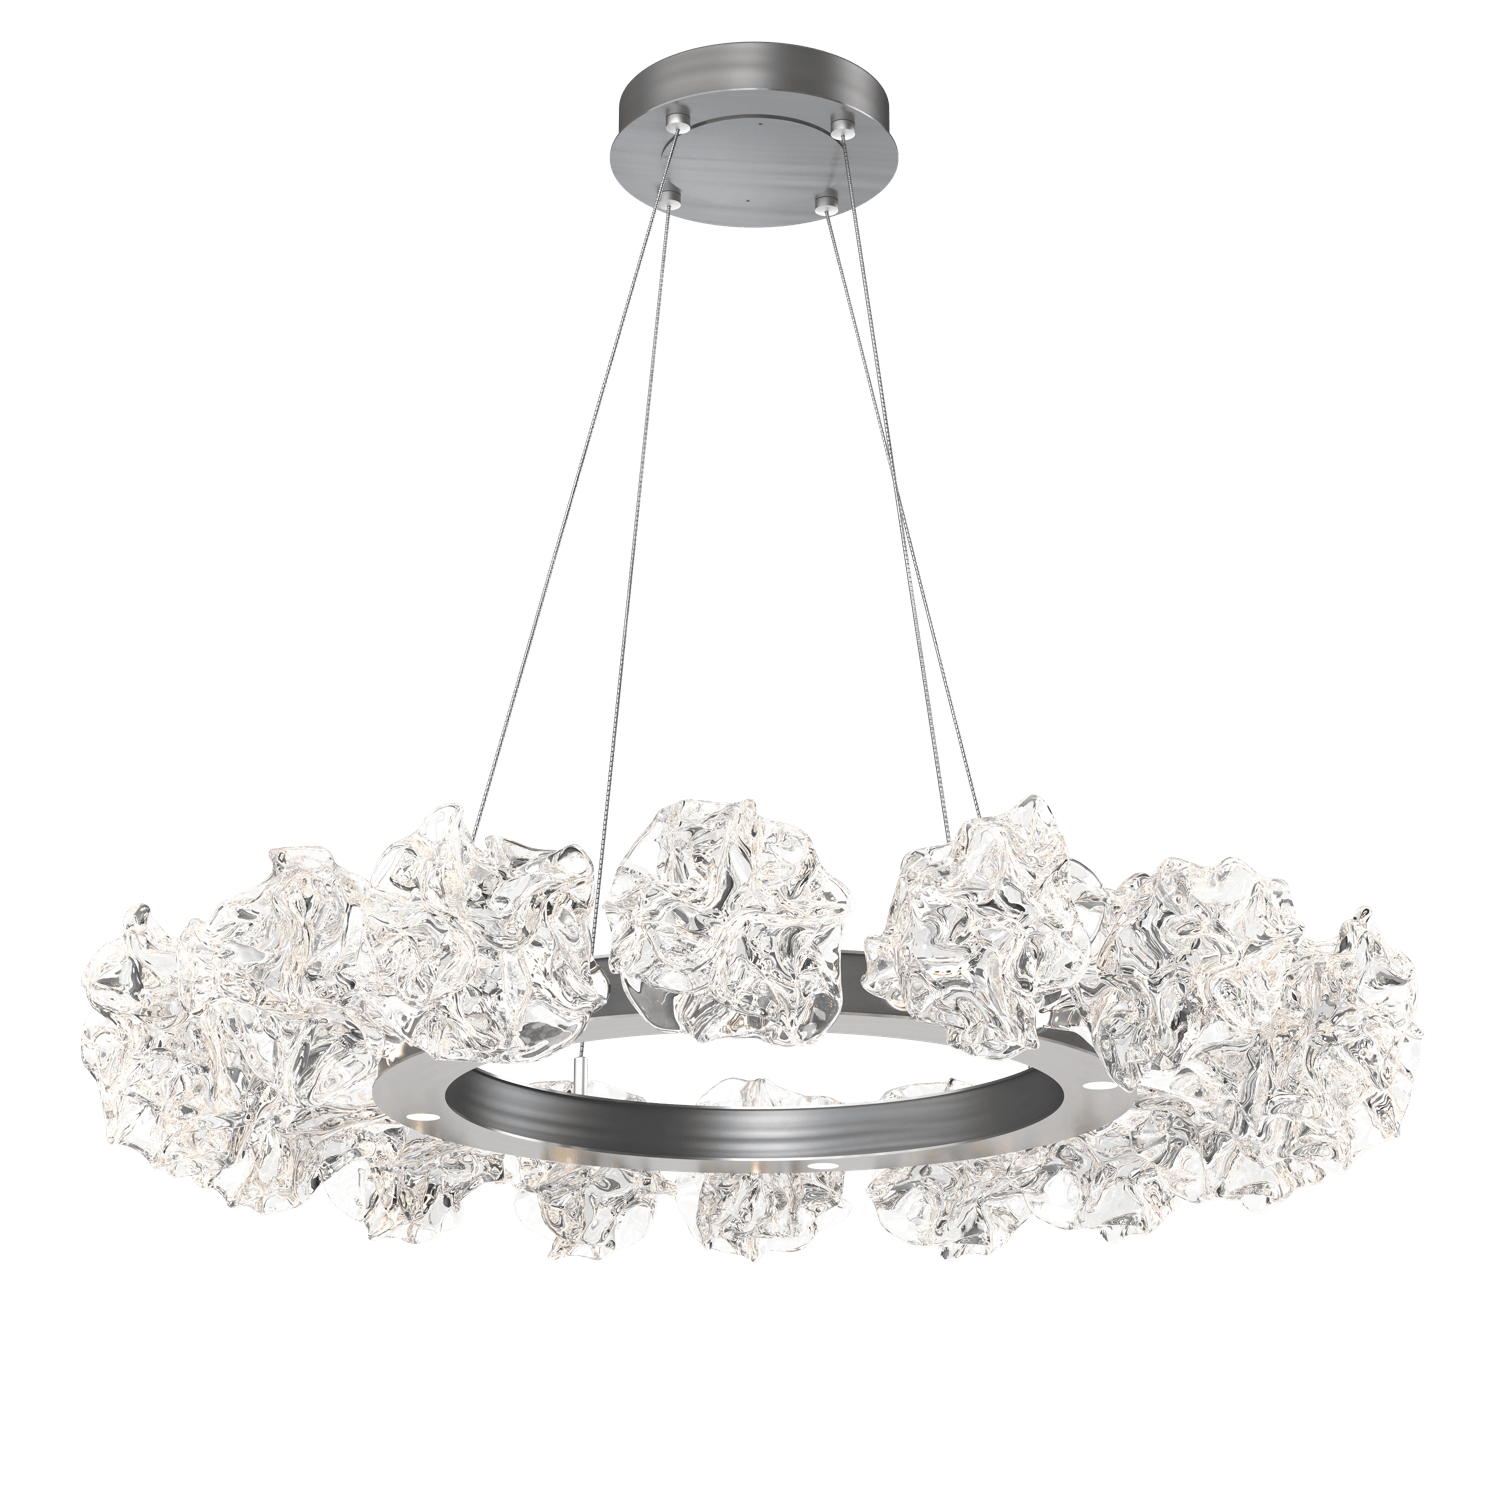 CHB0059-36-GM-Hammerton-Studio-Blossom-36-inch-radial-ring-chandelier-with-gunmetal-finish-and-clear-handblown-crystal-glass-shades-and-LED-lamping